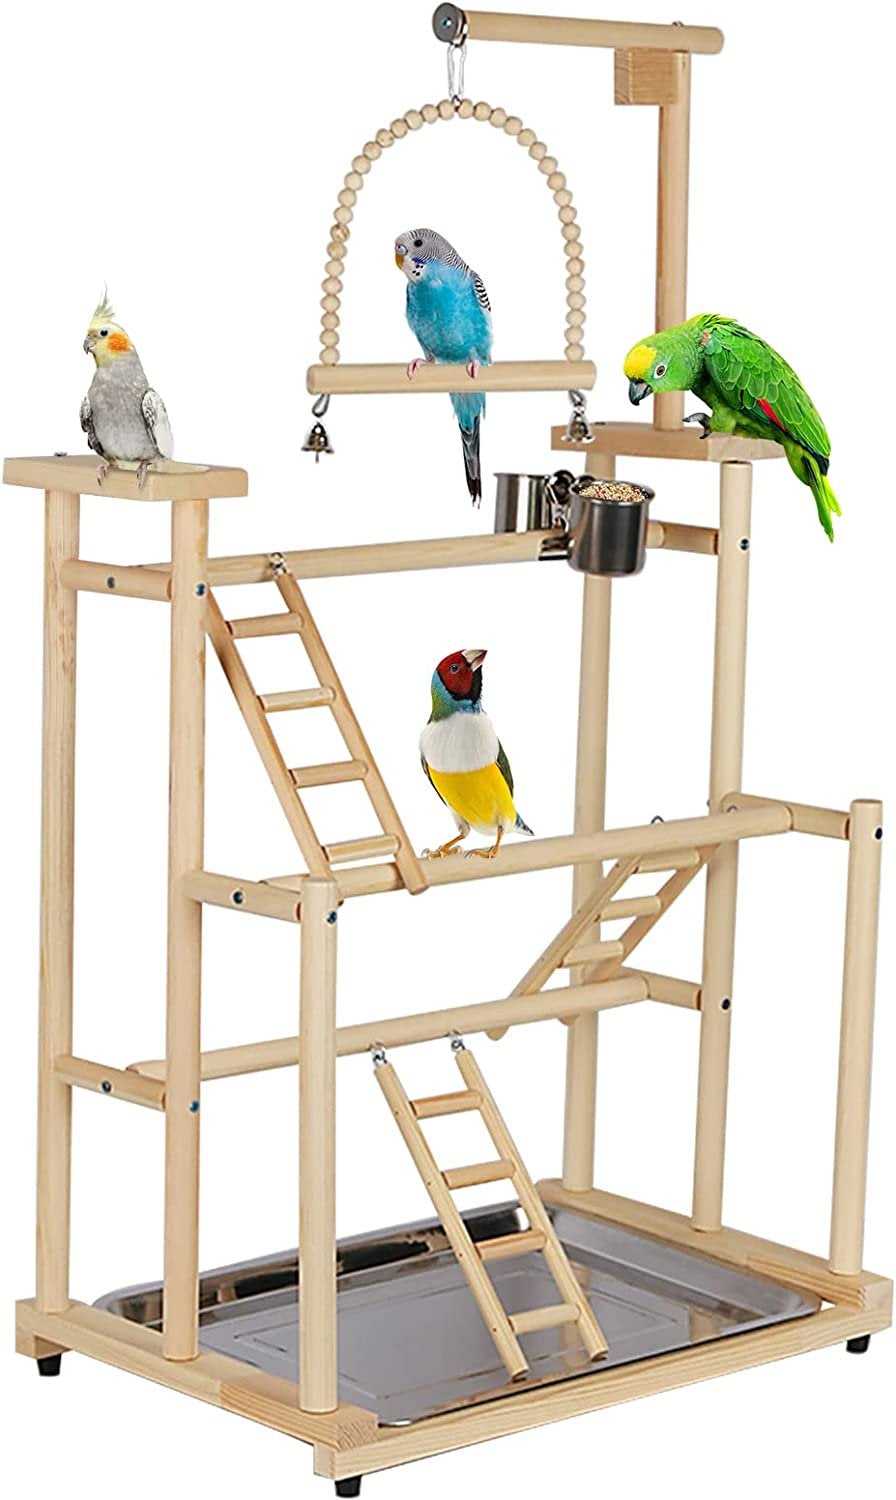 PENGZHOU 3 Layers Wood Bird Playground Large Parrot Playstand Bird Perch Stand Bird Gym Playground Playpen for Cockatiel Parakeet Parrot (With Installation Notes)